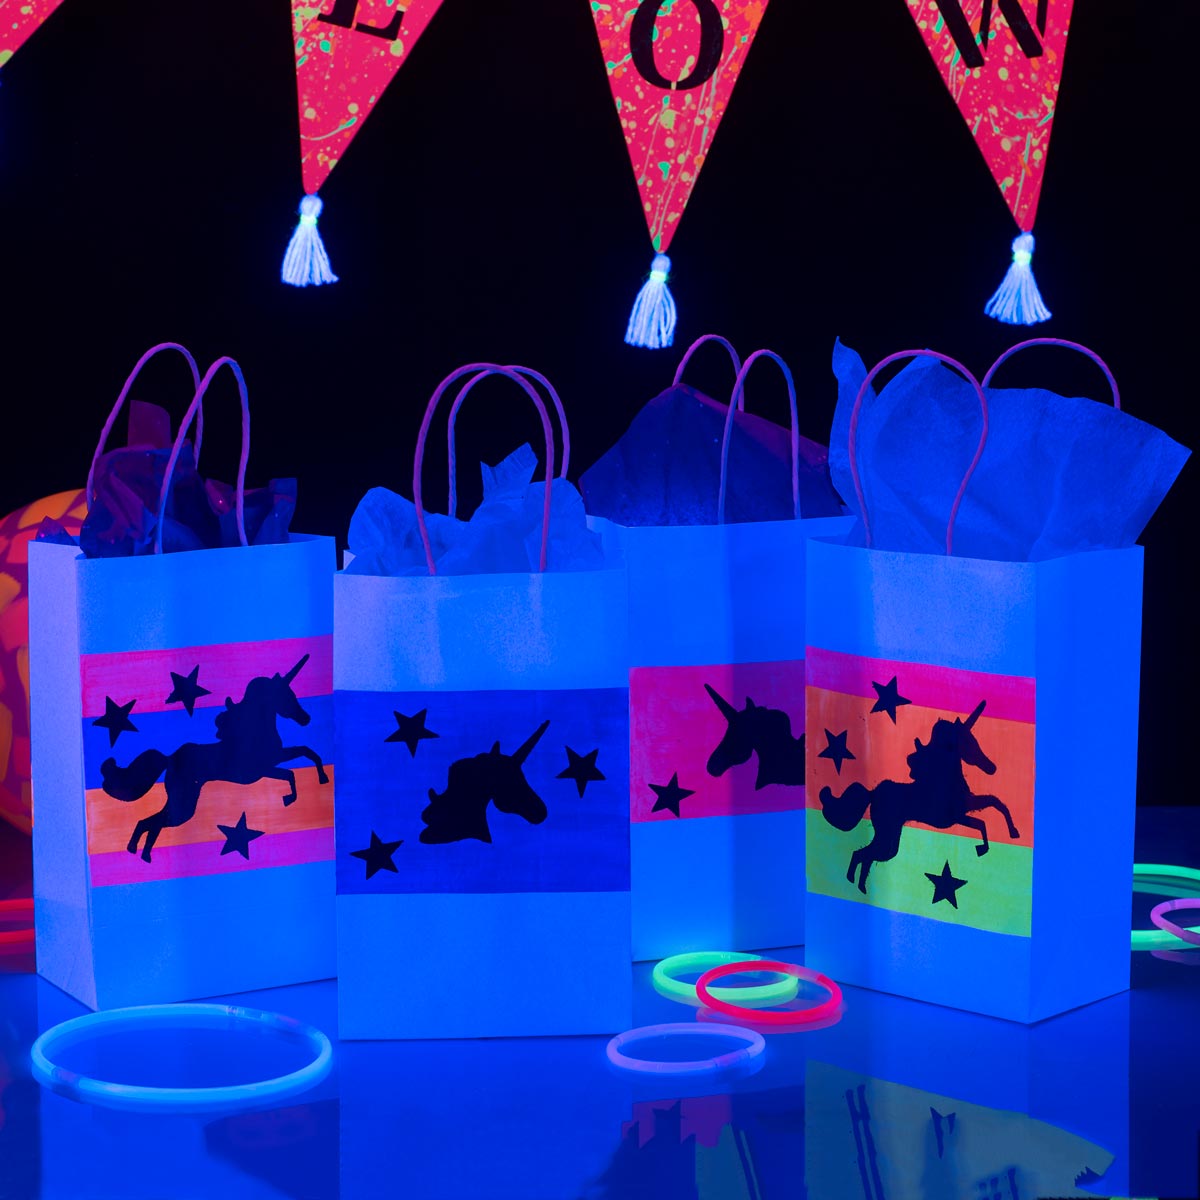 Glow-in-the-Dark Gift Bags - Project